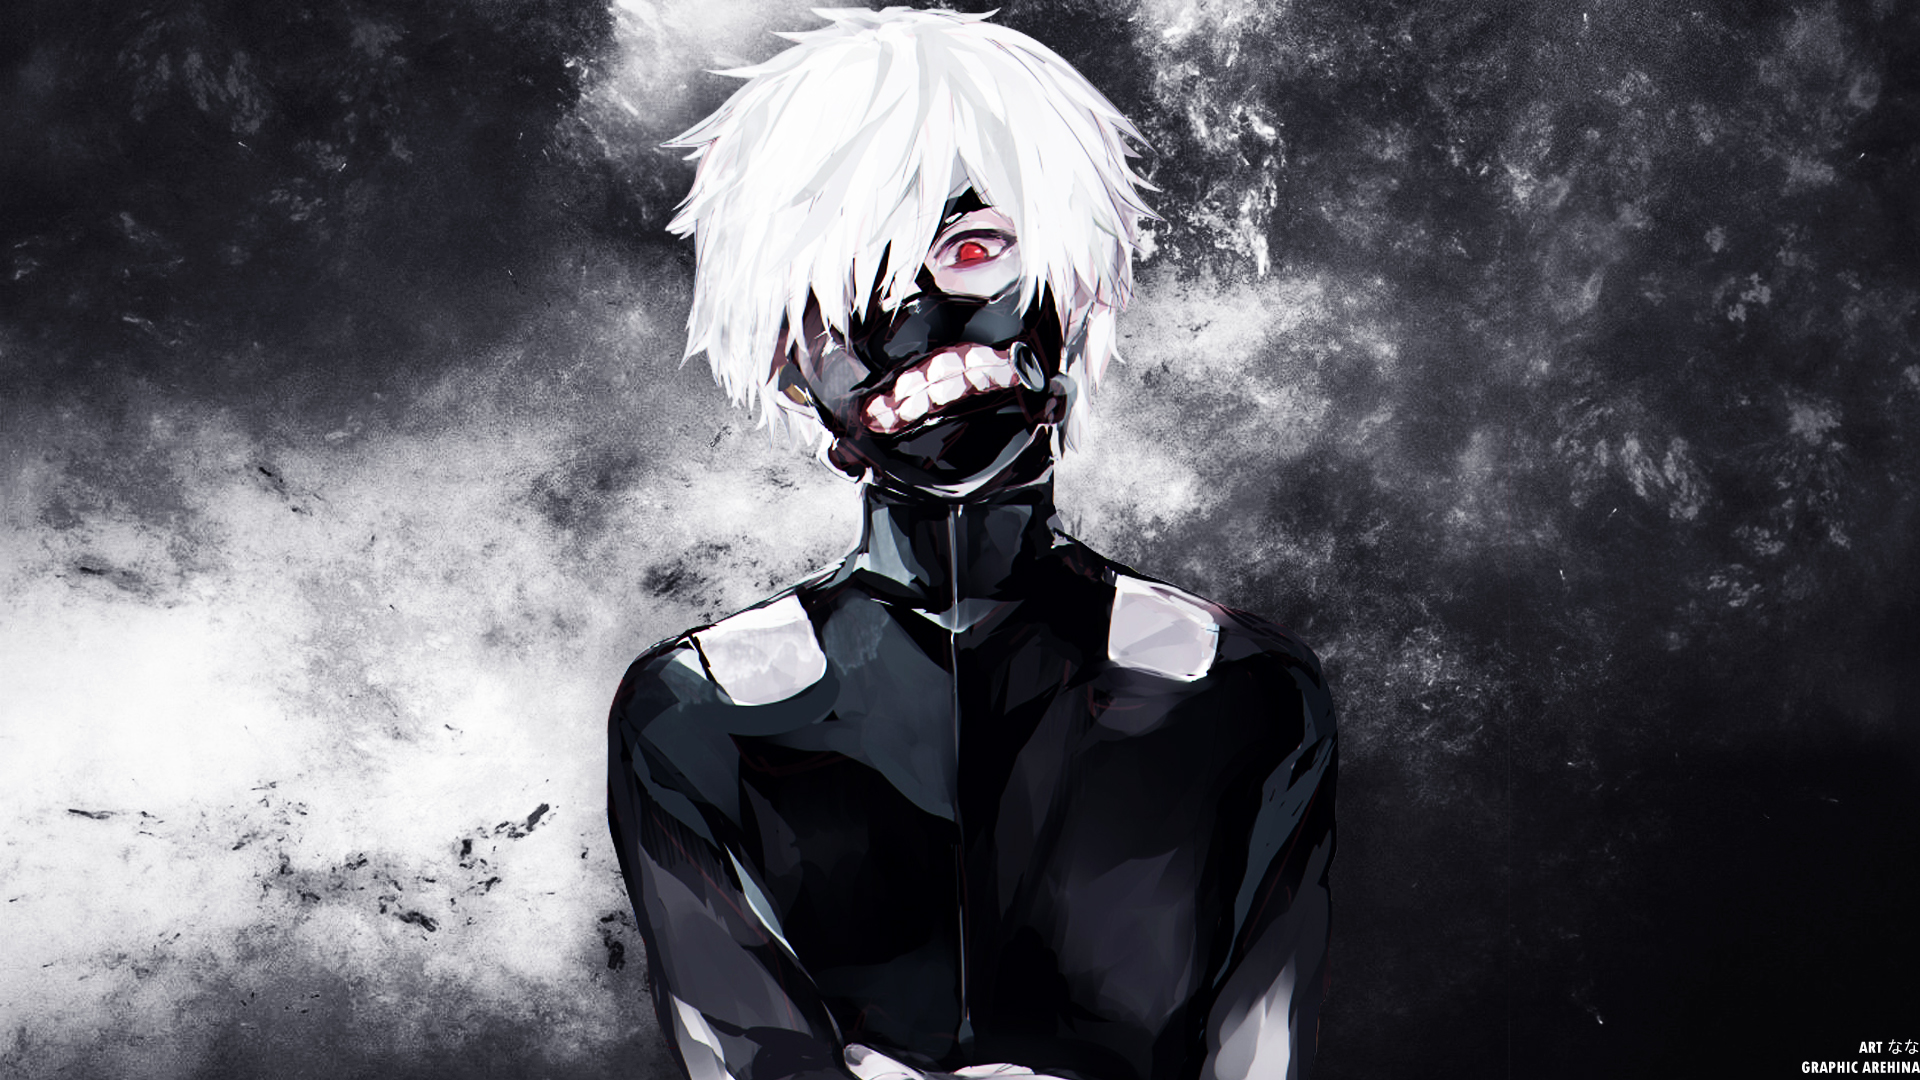 Anime tokyo ghoul hd paper by arehina